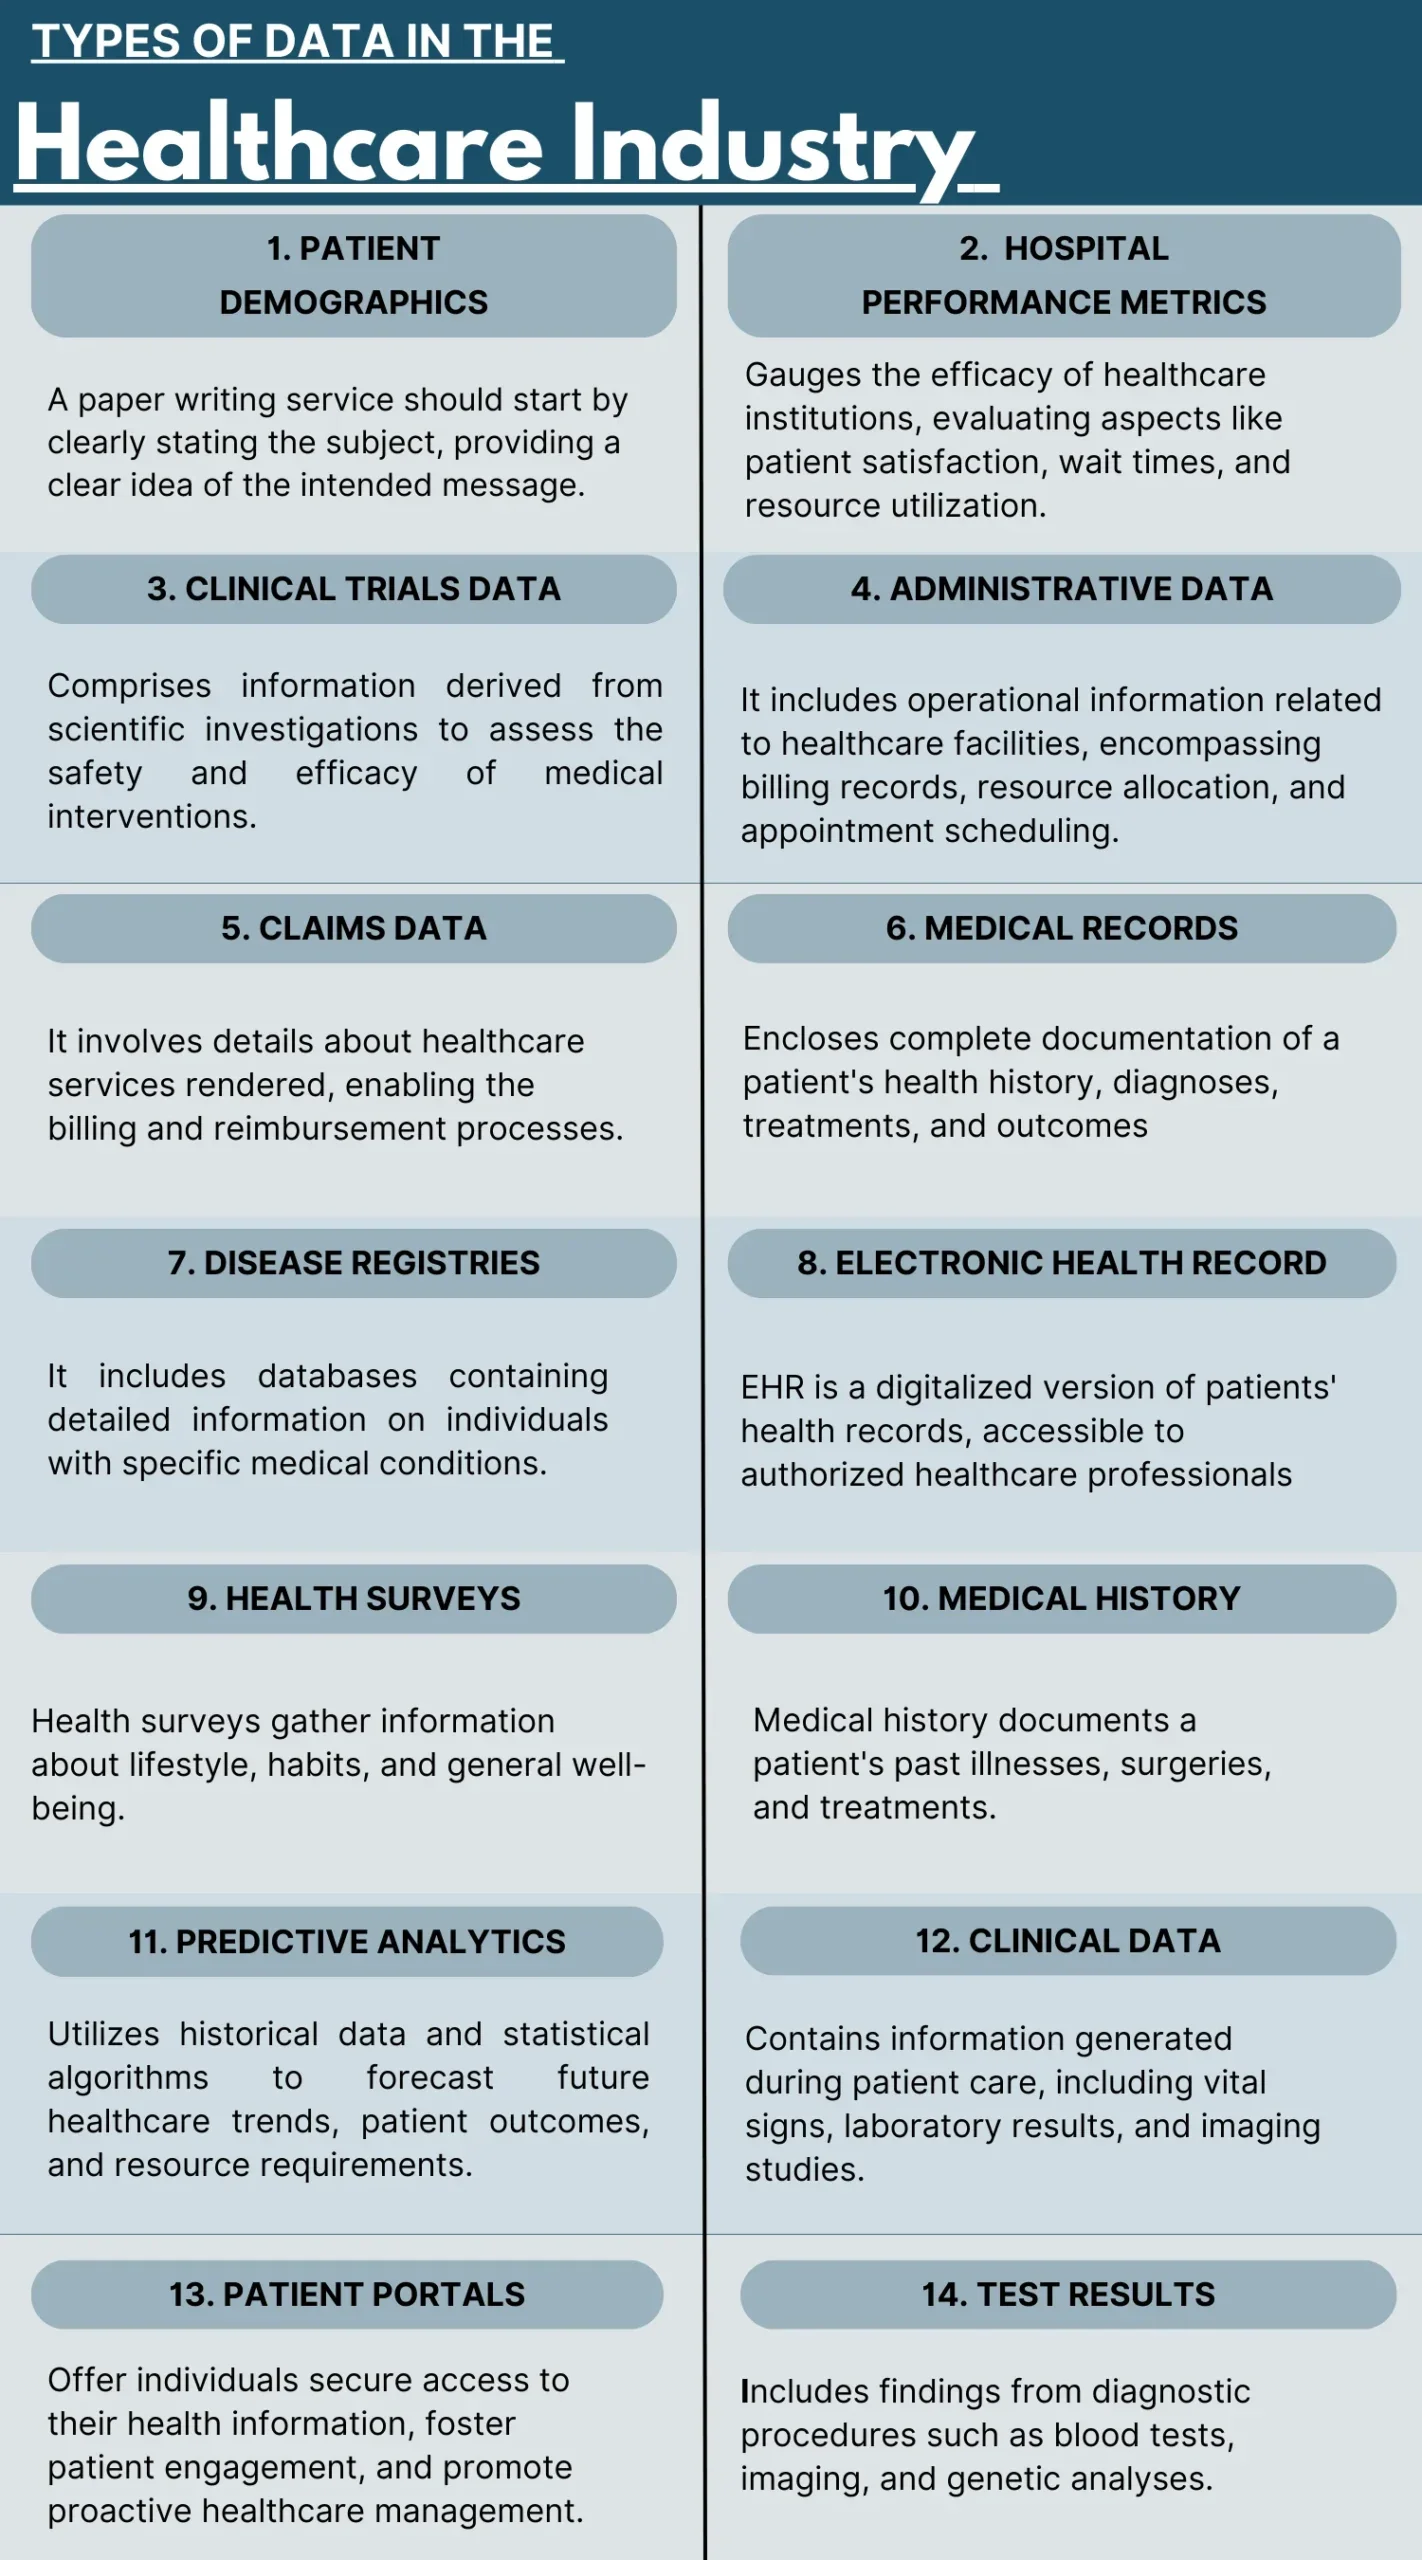 Types of Data in the Healthcare Industry